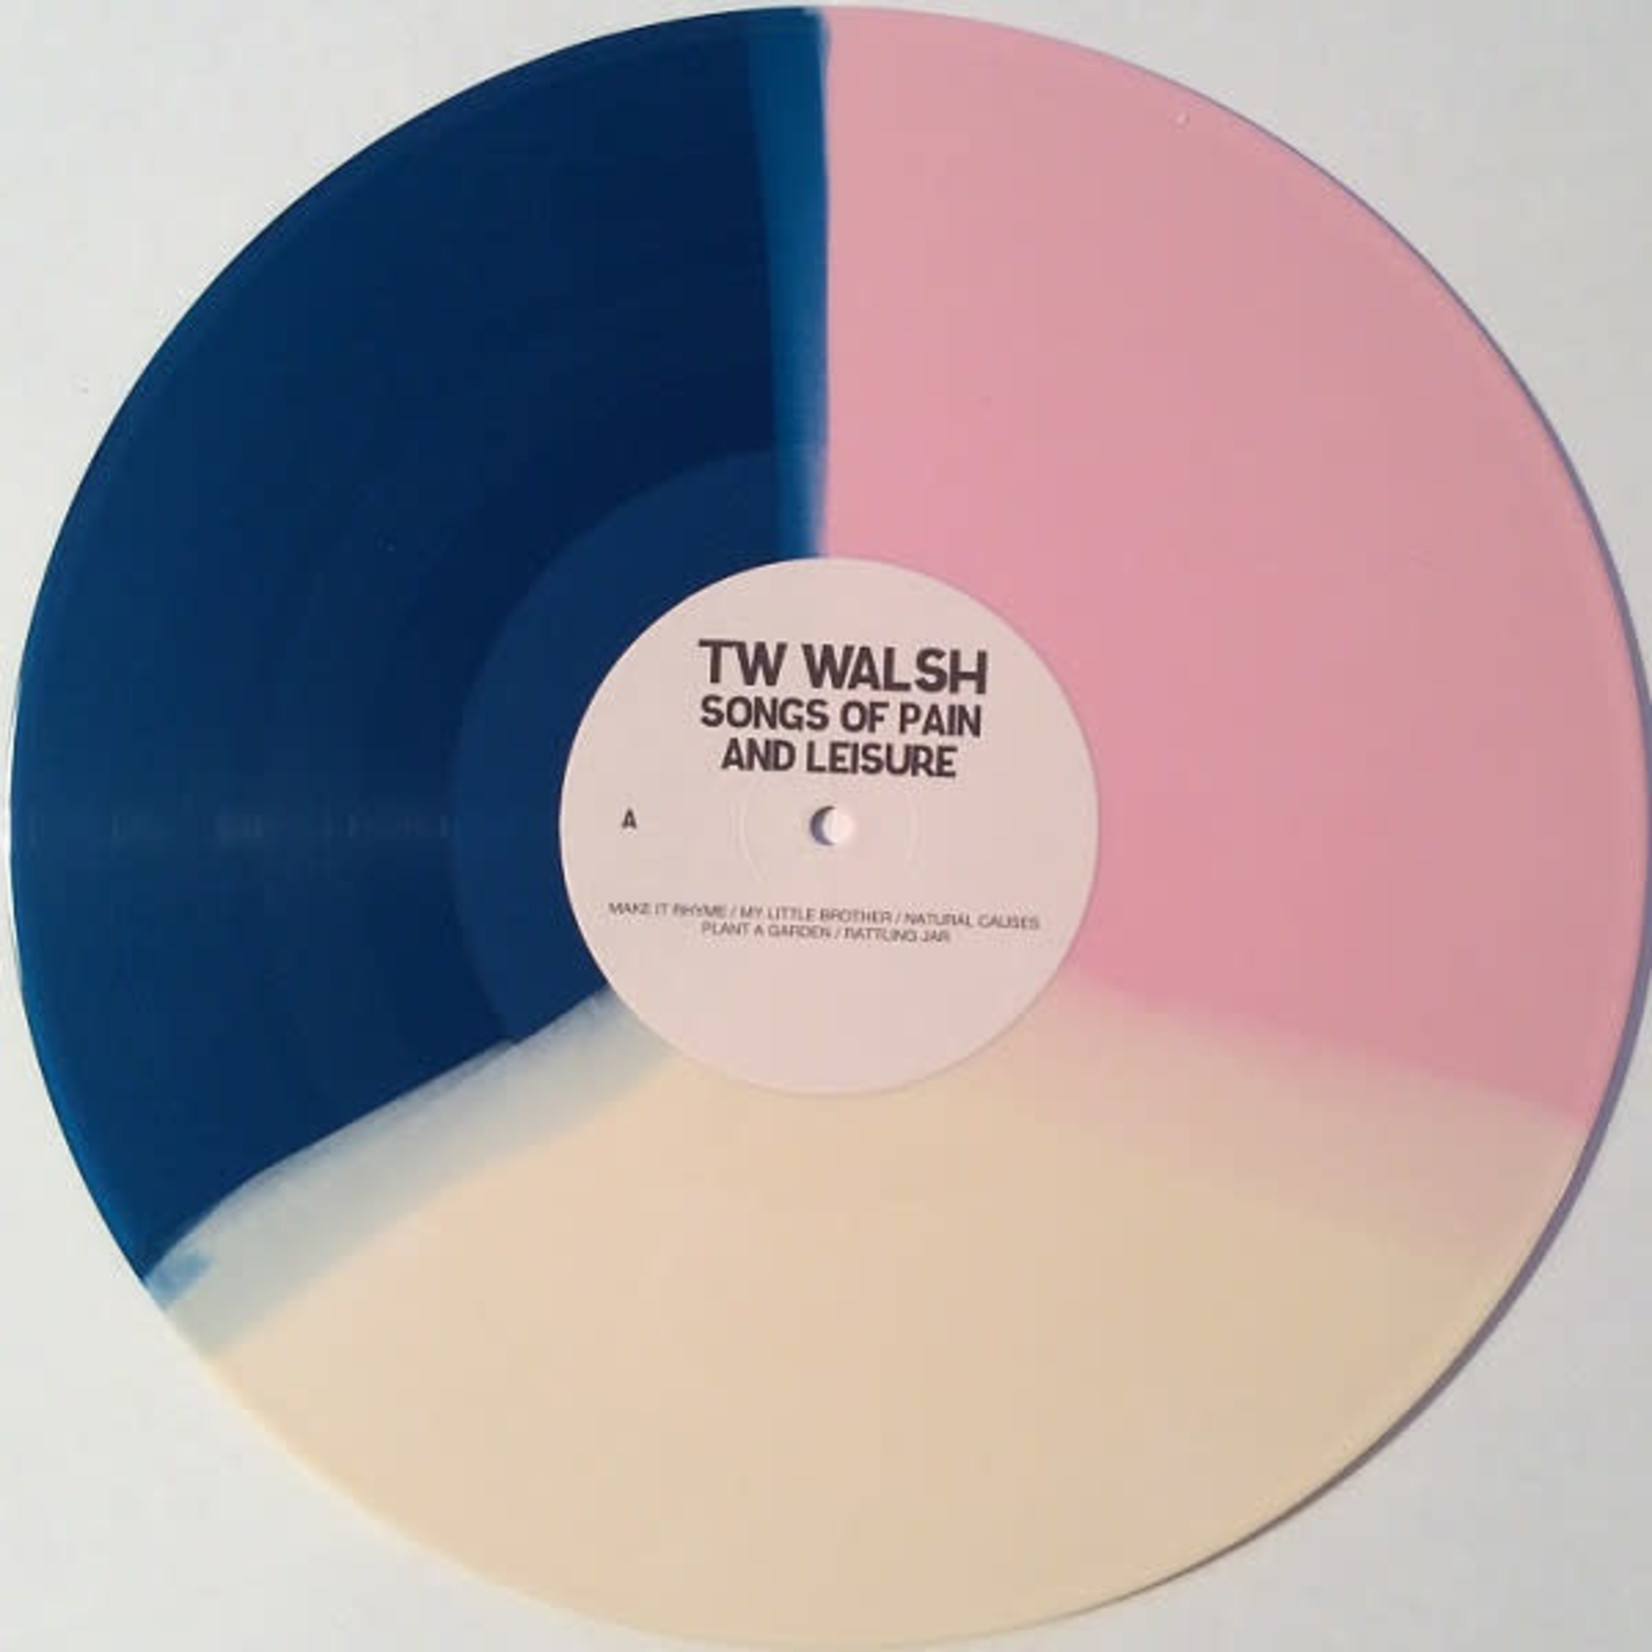 Graveface TW Walsh - Songs Of Pain And Leisure (LP) [Tri-Color]